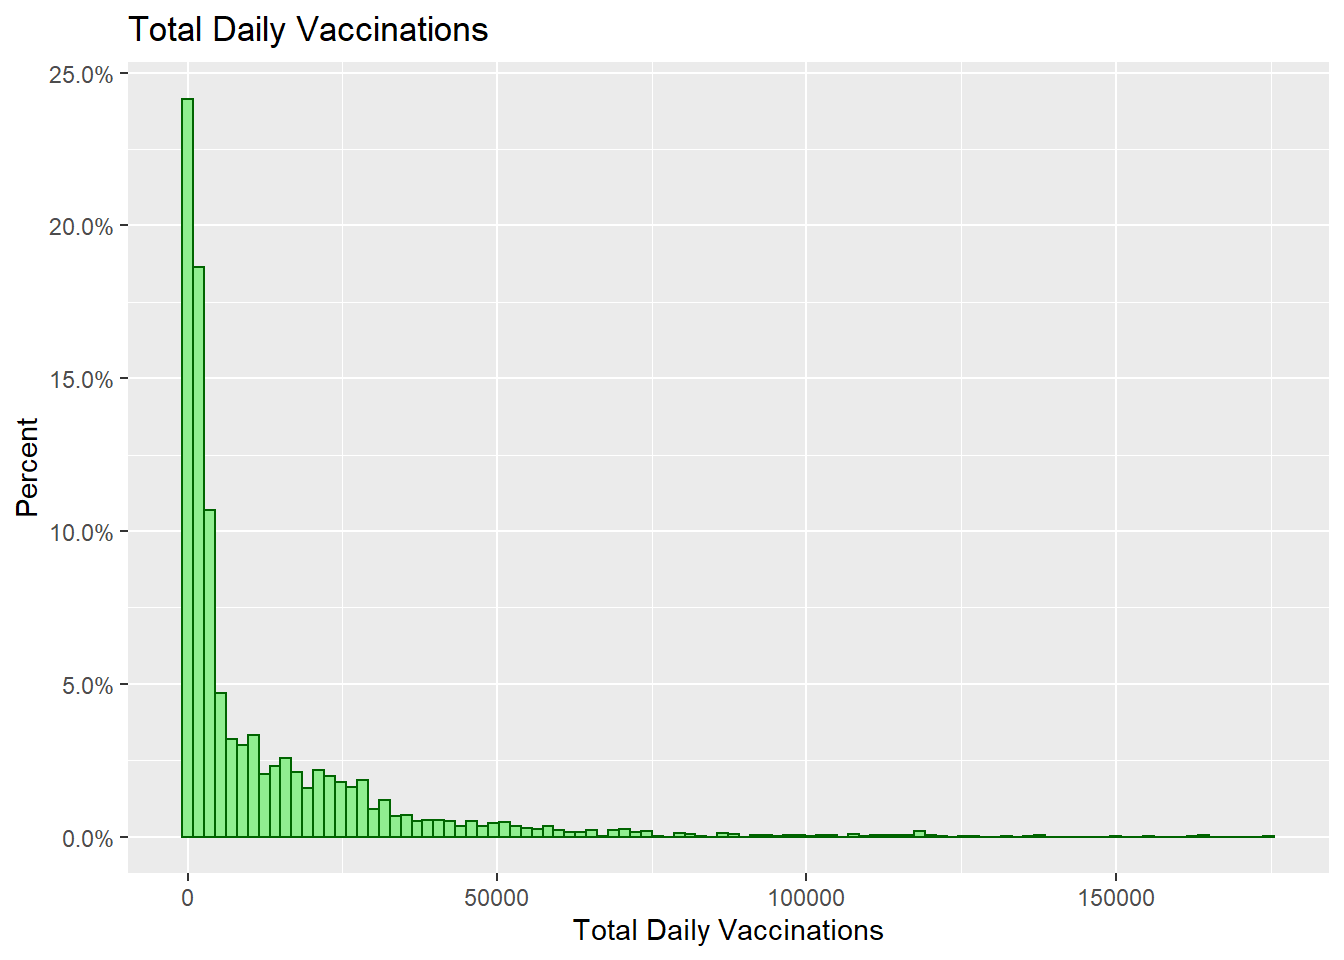 Histogram with percentages on the y-axis